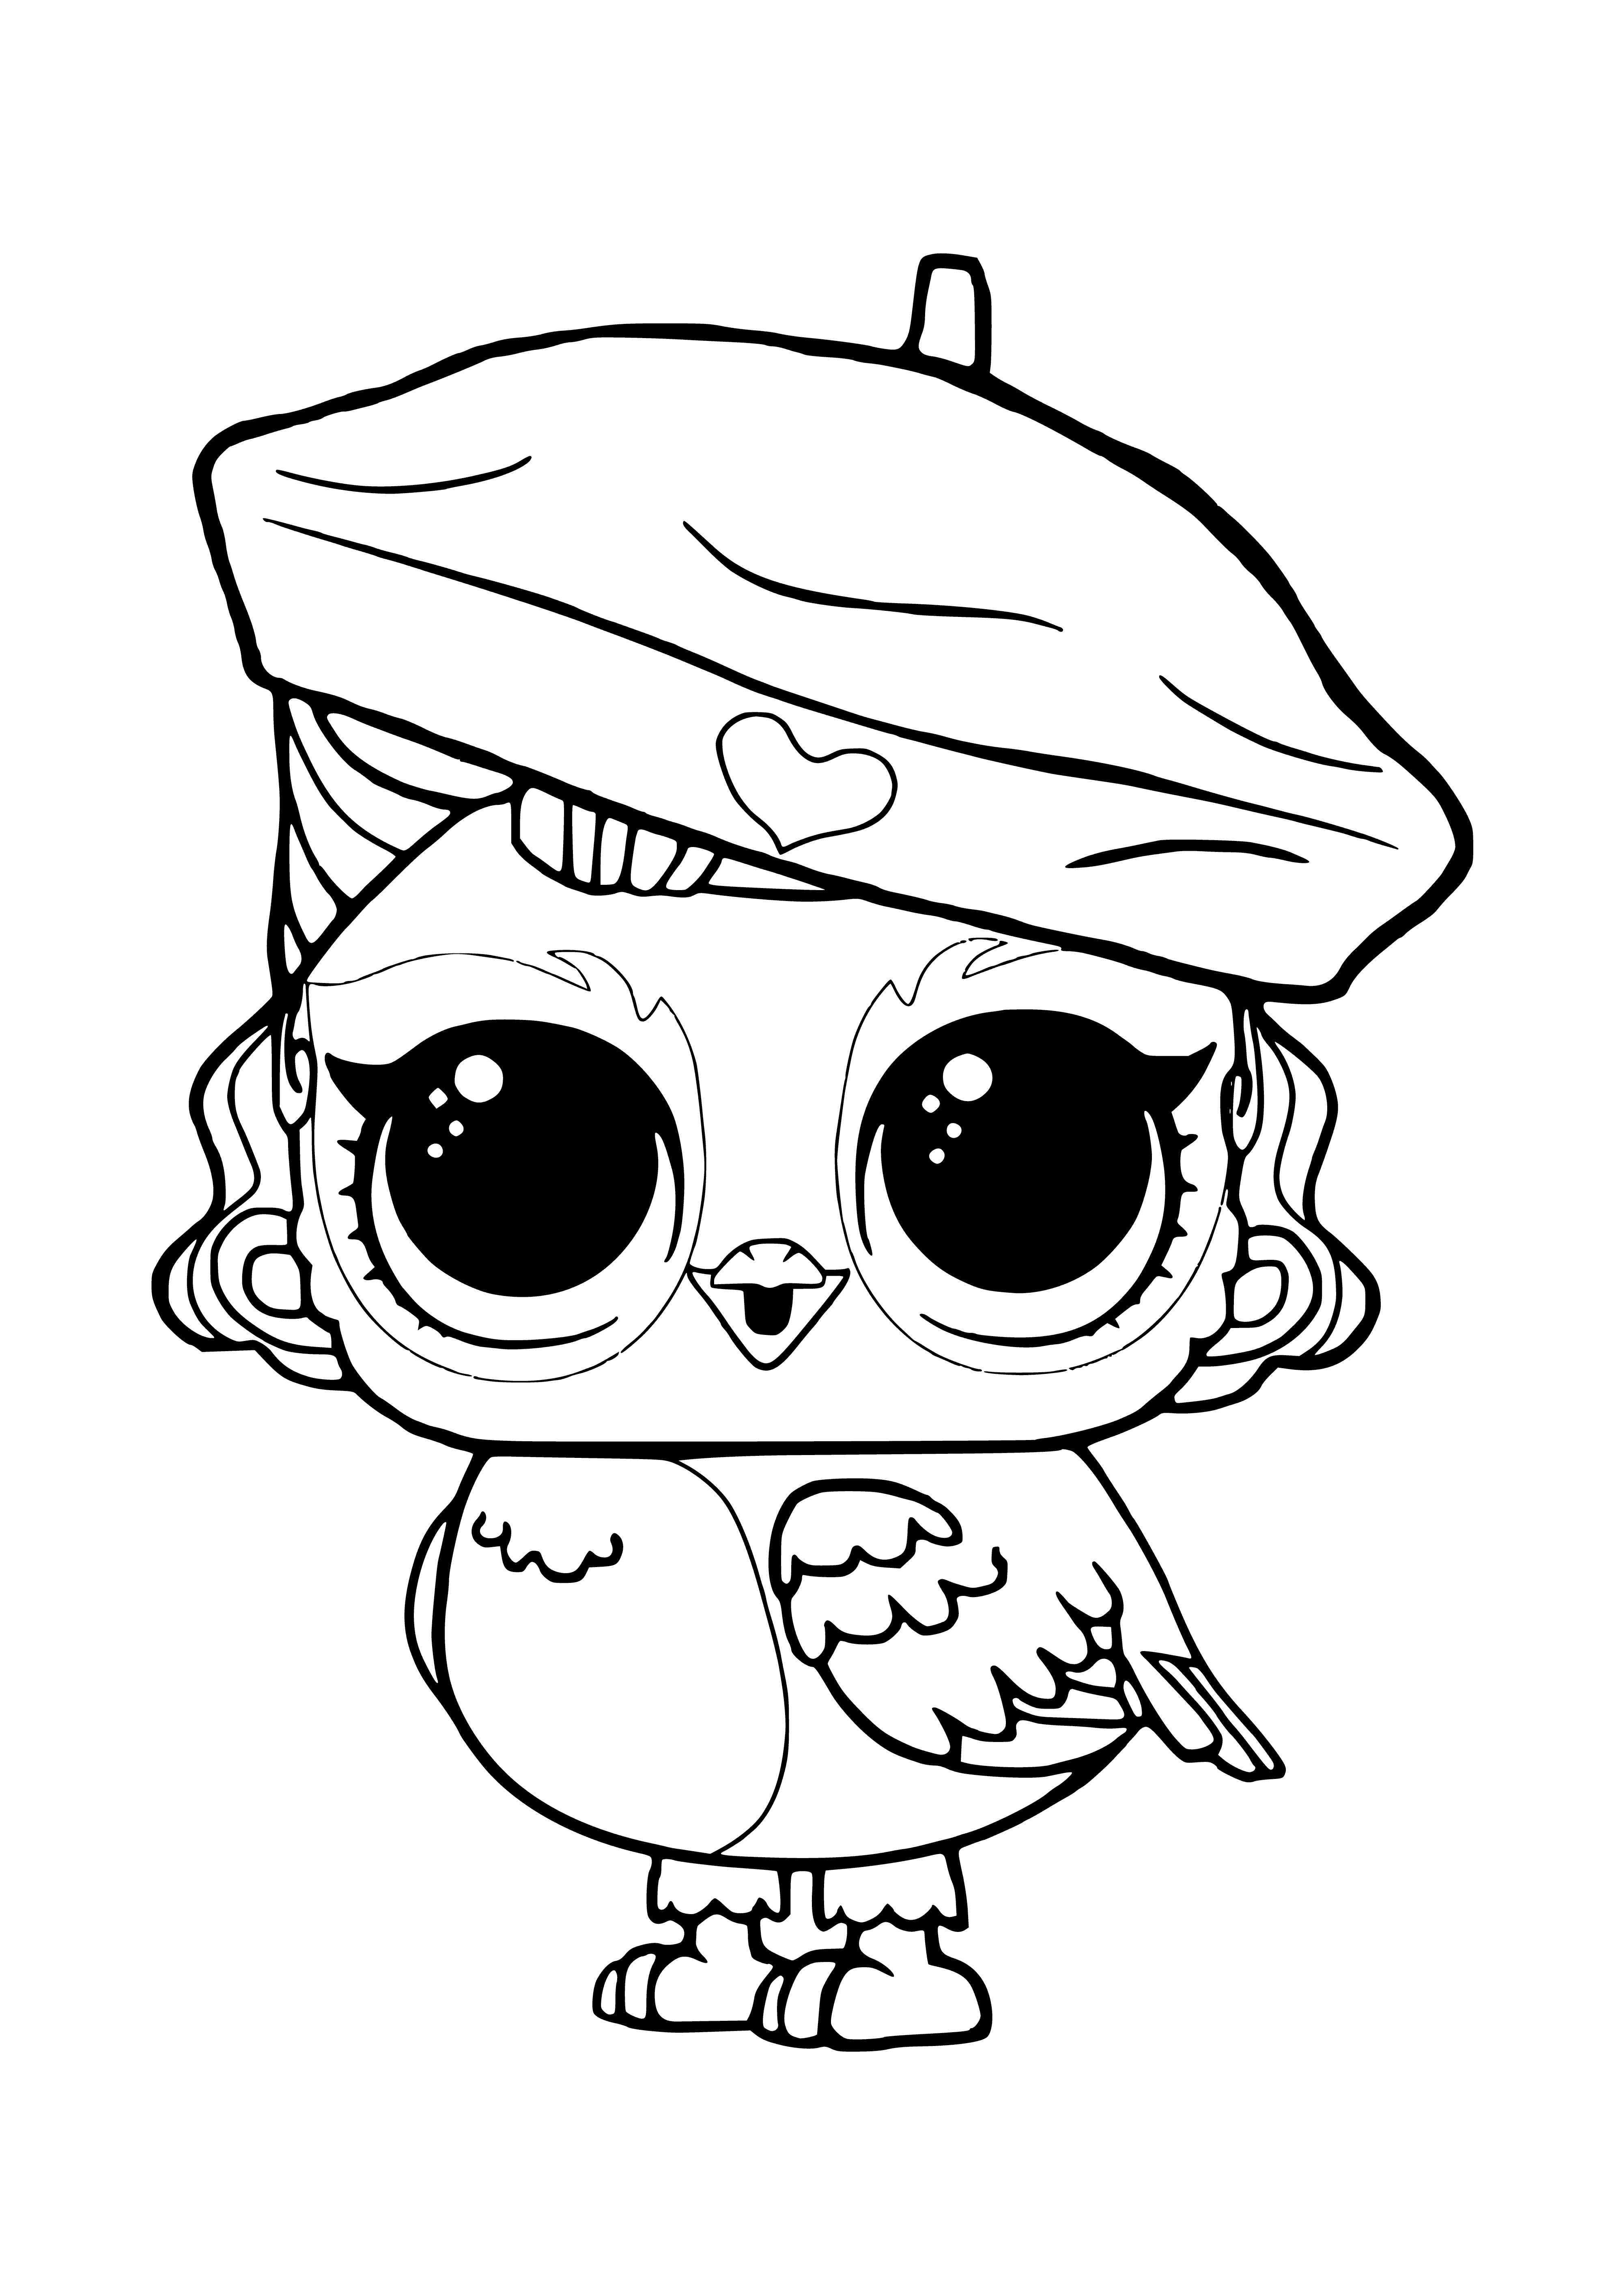 coloring page: LOL Pet Owl Angel: small white owl w/blue eyes & bow, blue/white wings w/stars, blue/white striped scarf & platform.